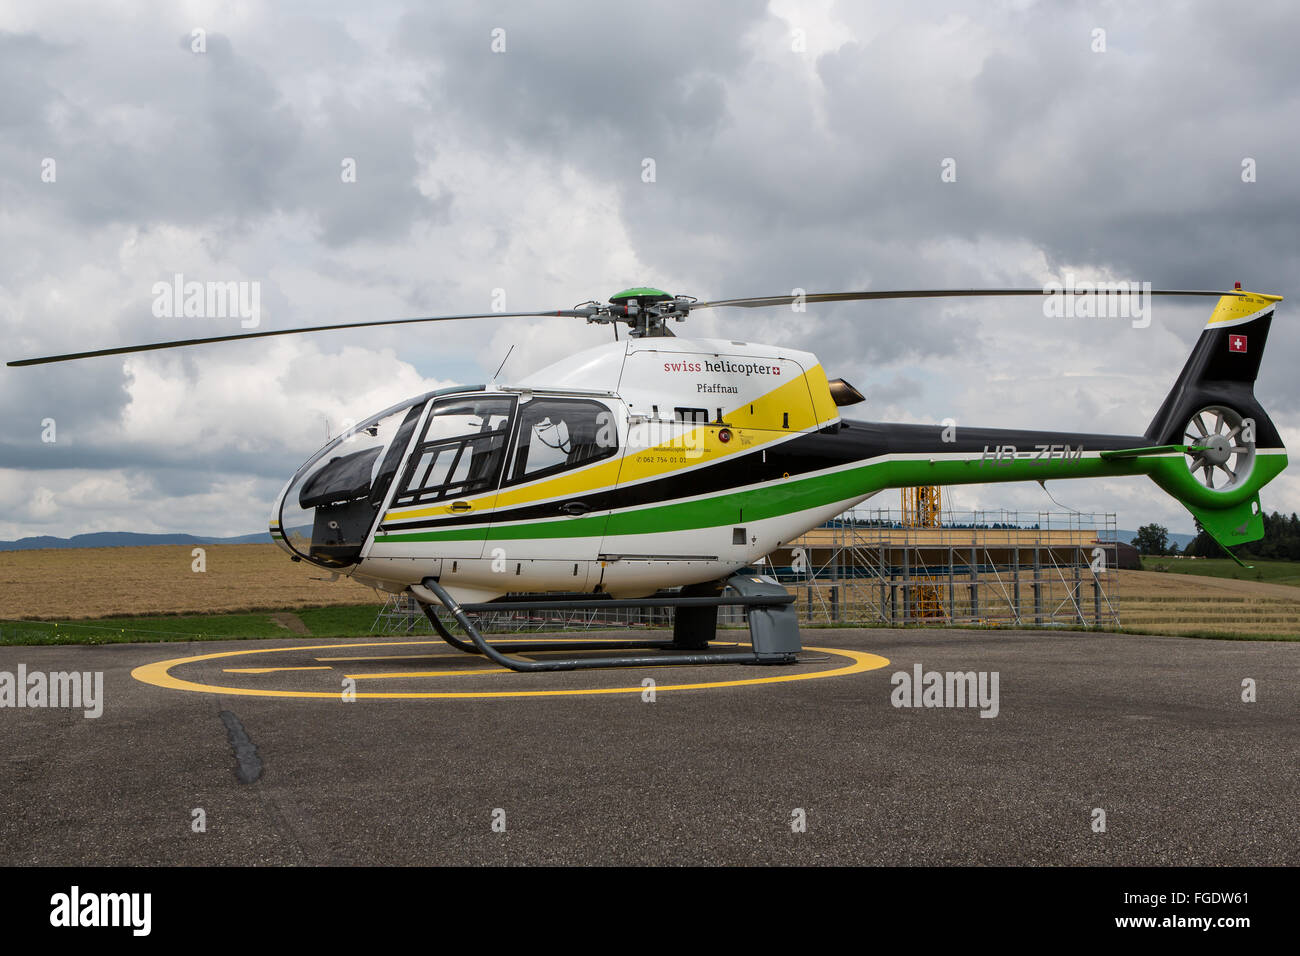 Swiss Helicopter Eurocopter EC 120B Colibri Banque D'Images